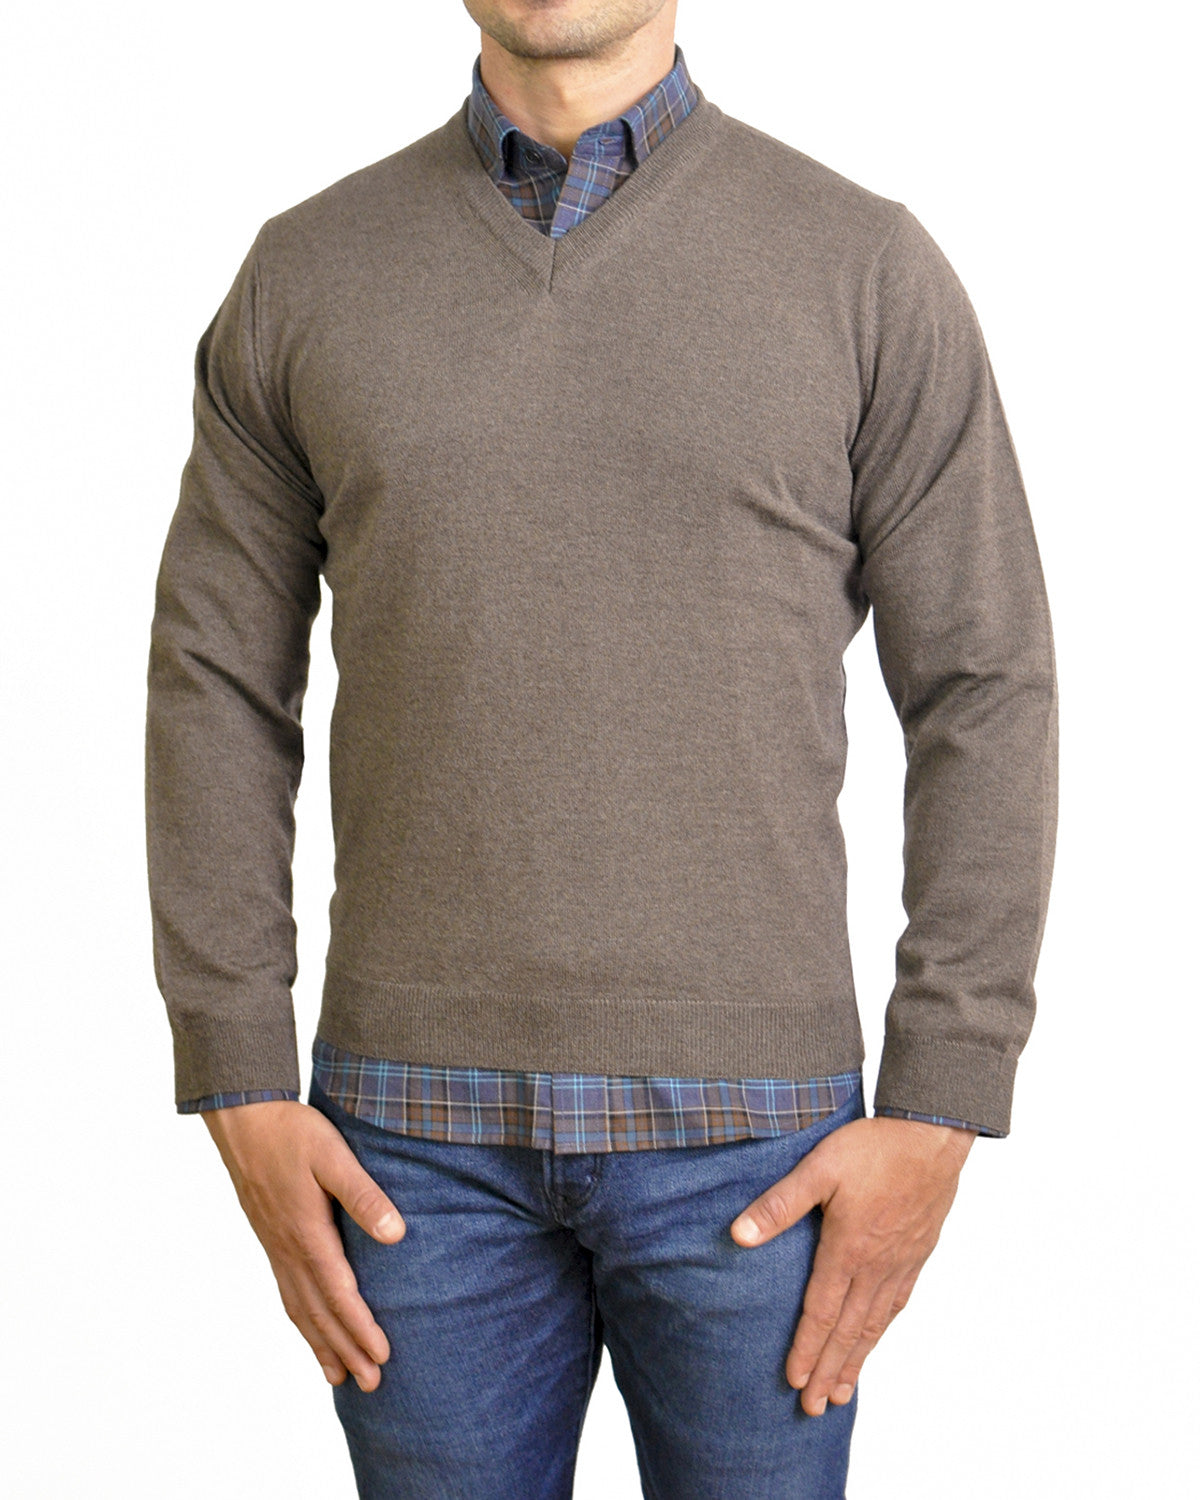 Dylan | Catalina Blue | Sweaters for Shorter Men 5' 9